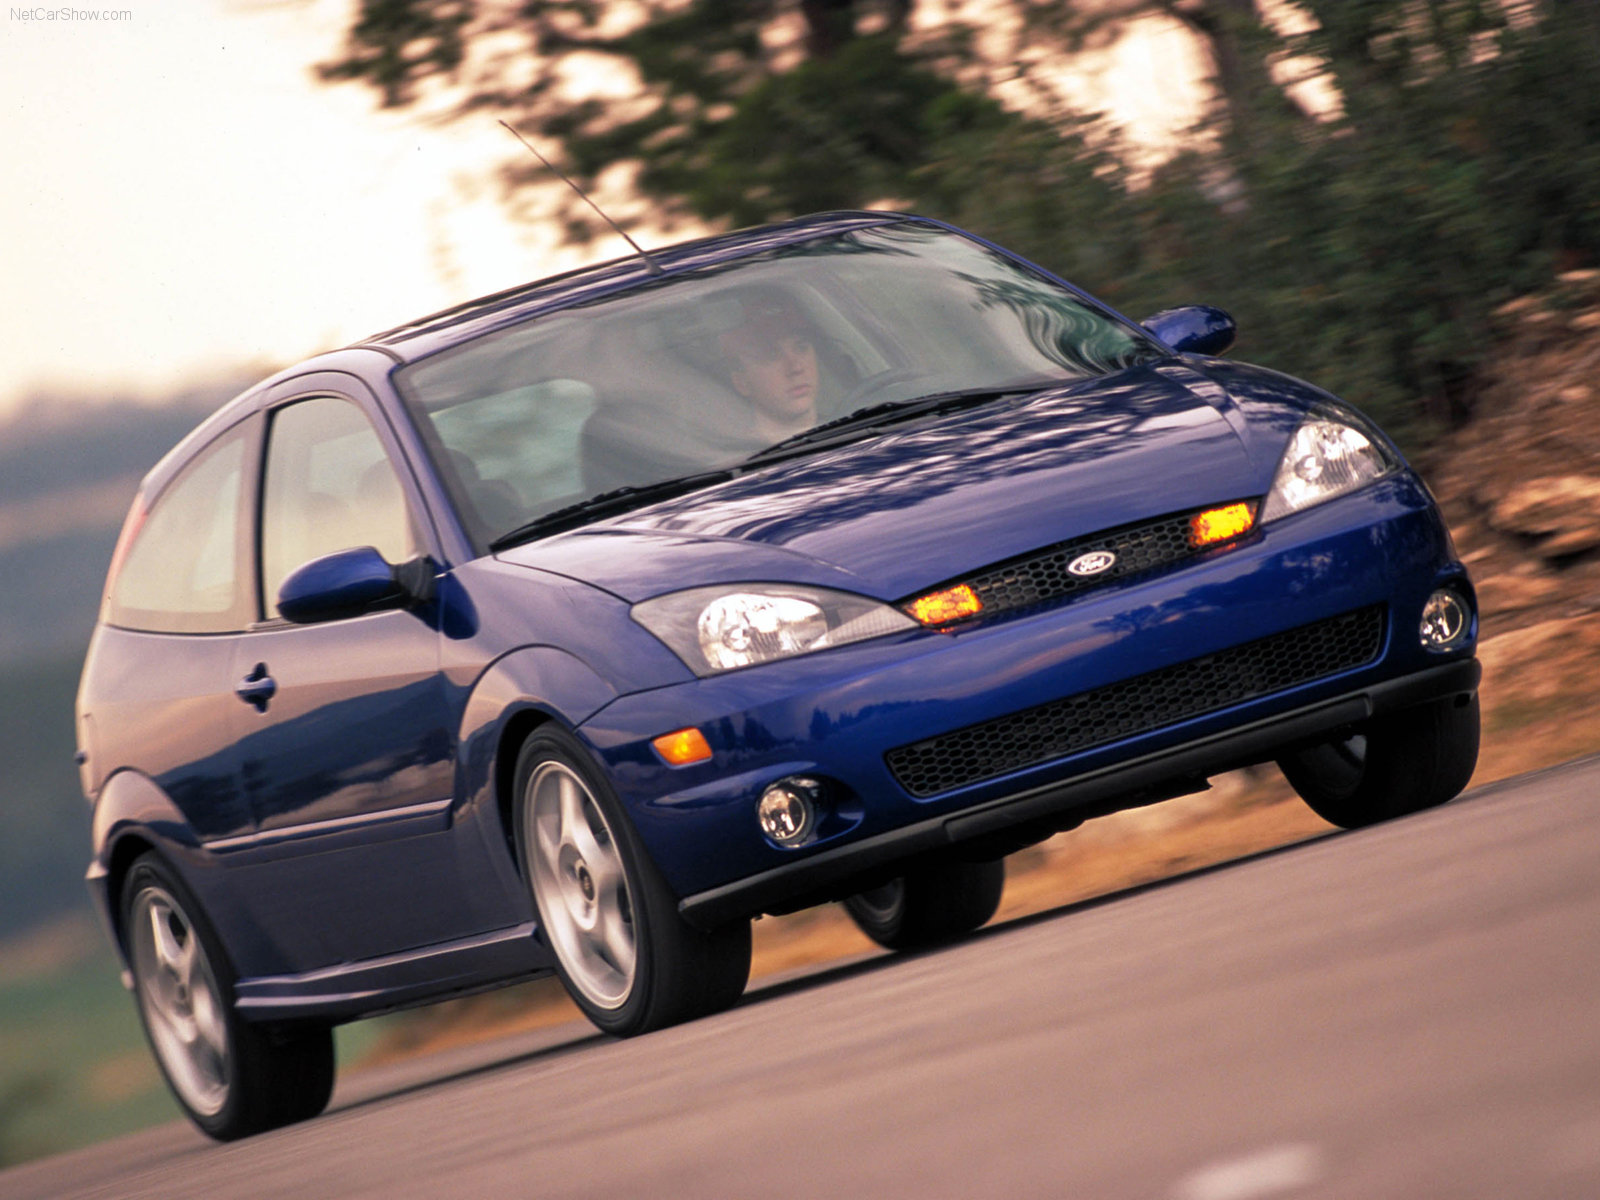 Б у форд фокус 1. Ford Focus SVT 2002. Ford Focus 1 SVT. Ford Focus SVT. Форд фокус svt170.